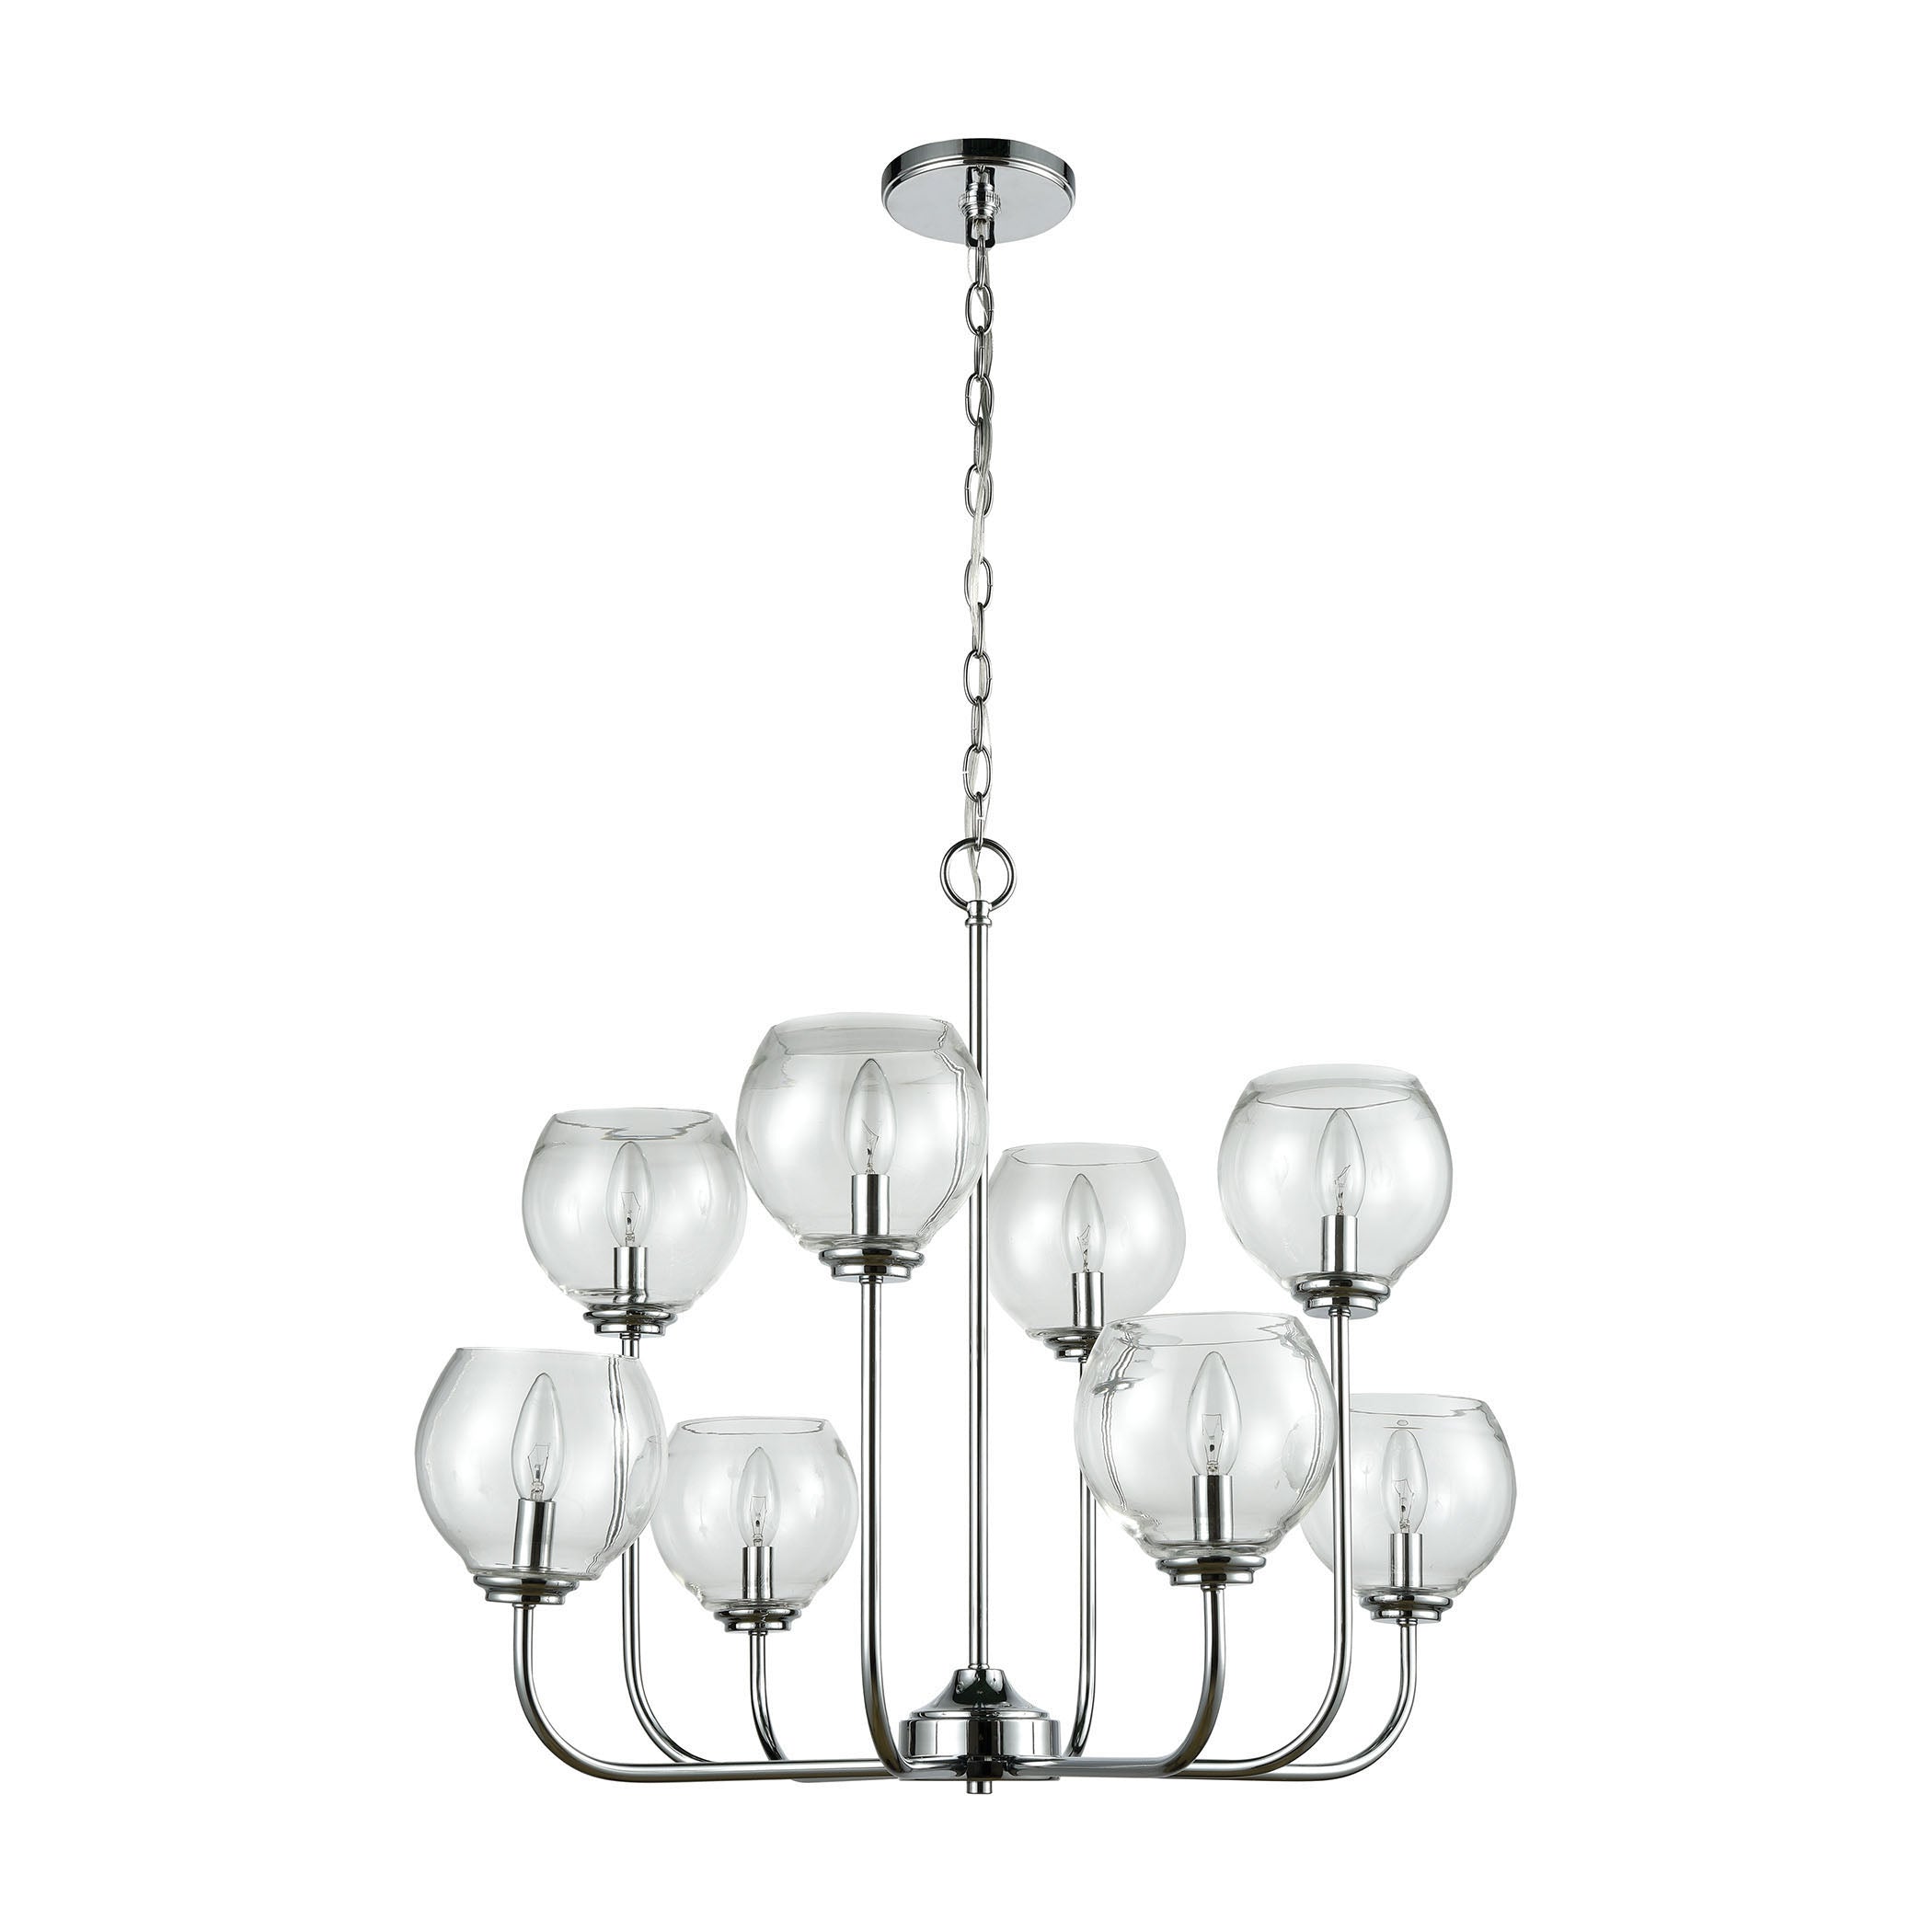 ELK Lighting 81365/4+4 Emory 8-Light Chandelier in Polished Chrome with Clear Blown Glass